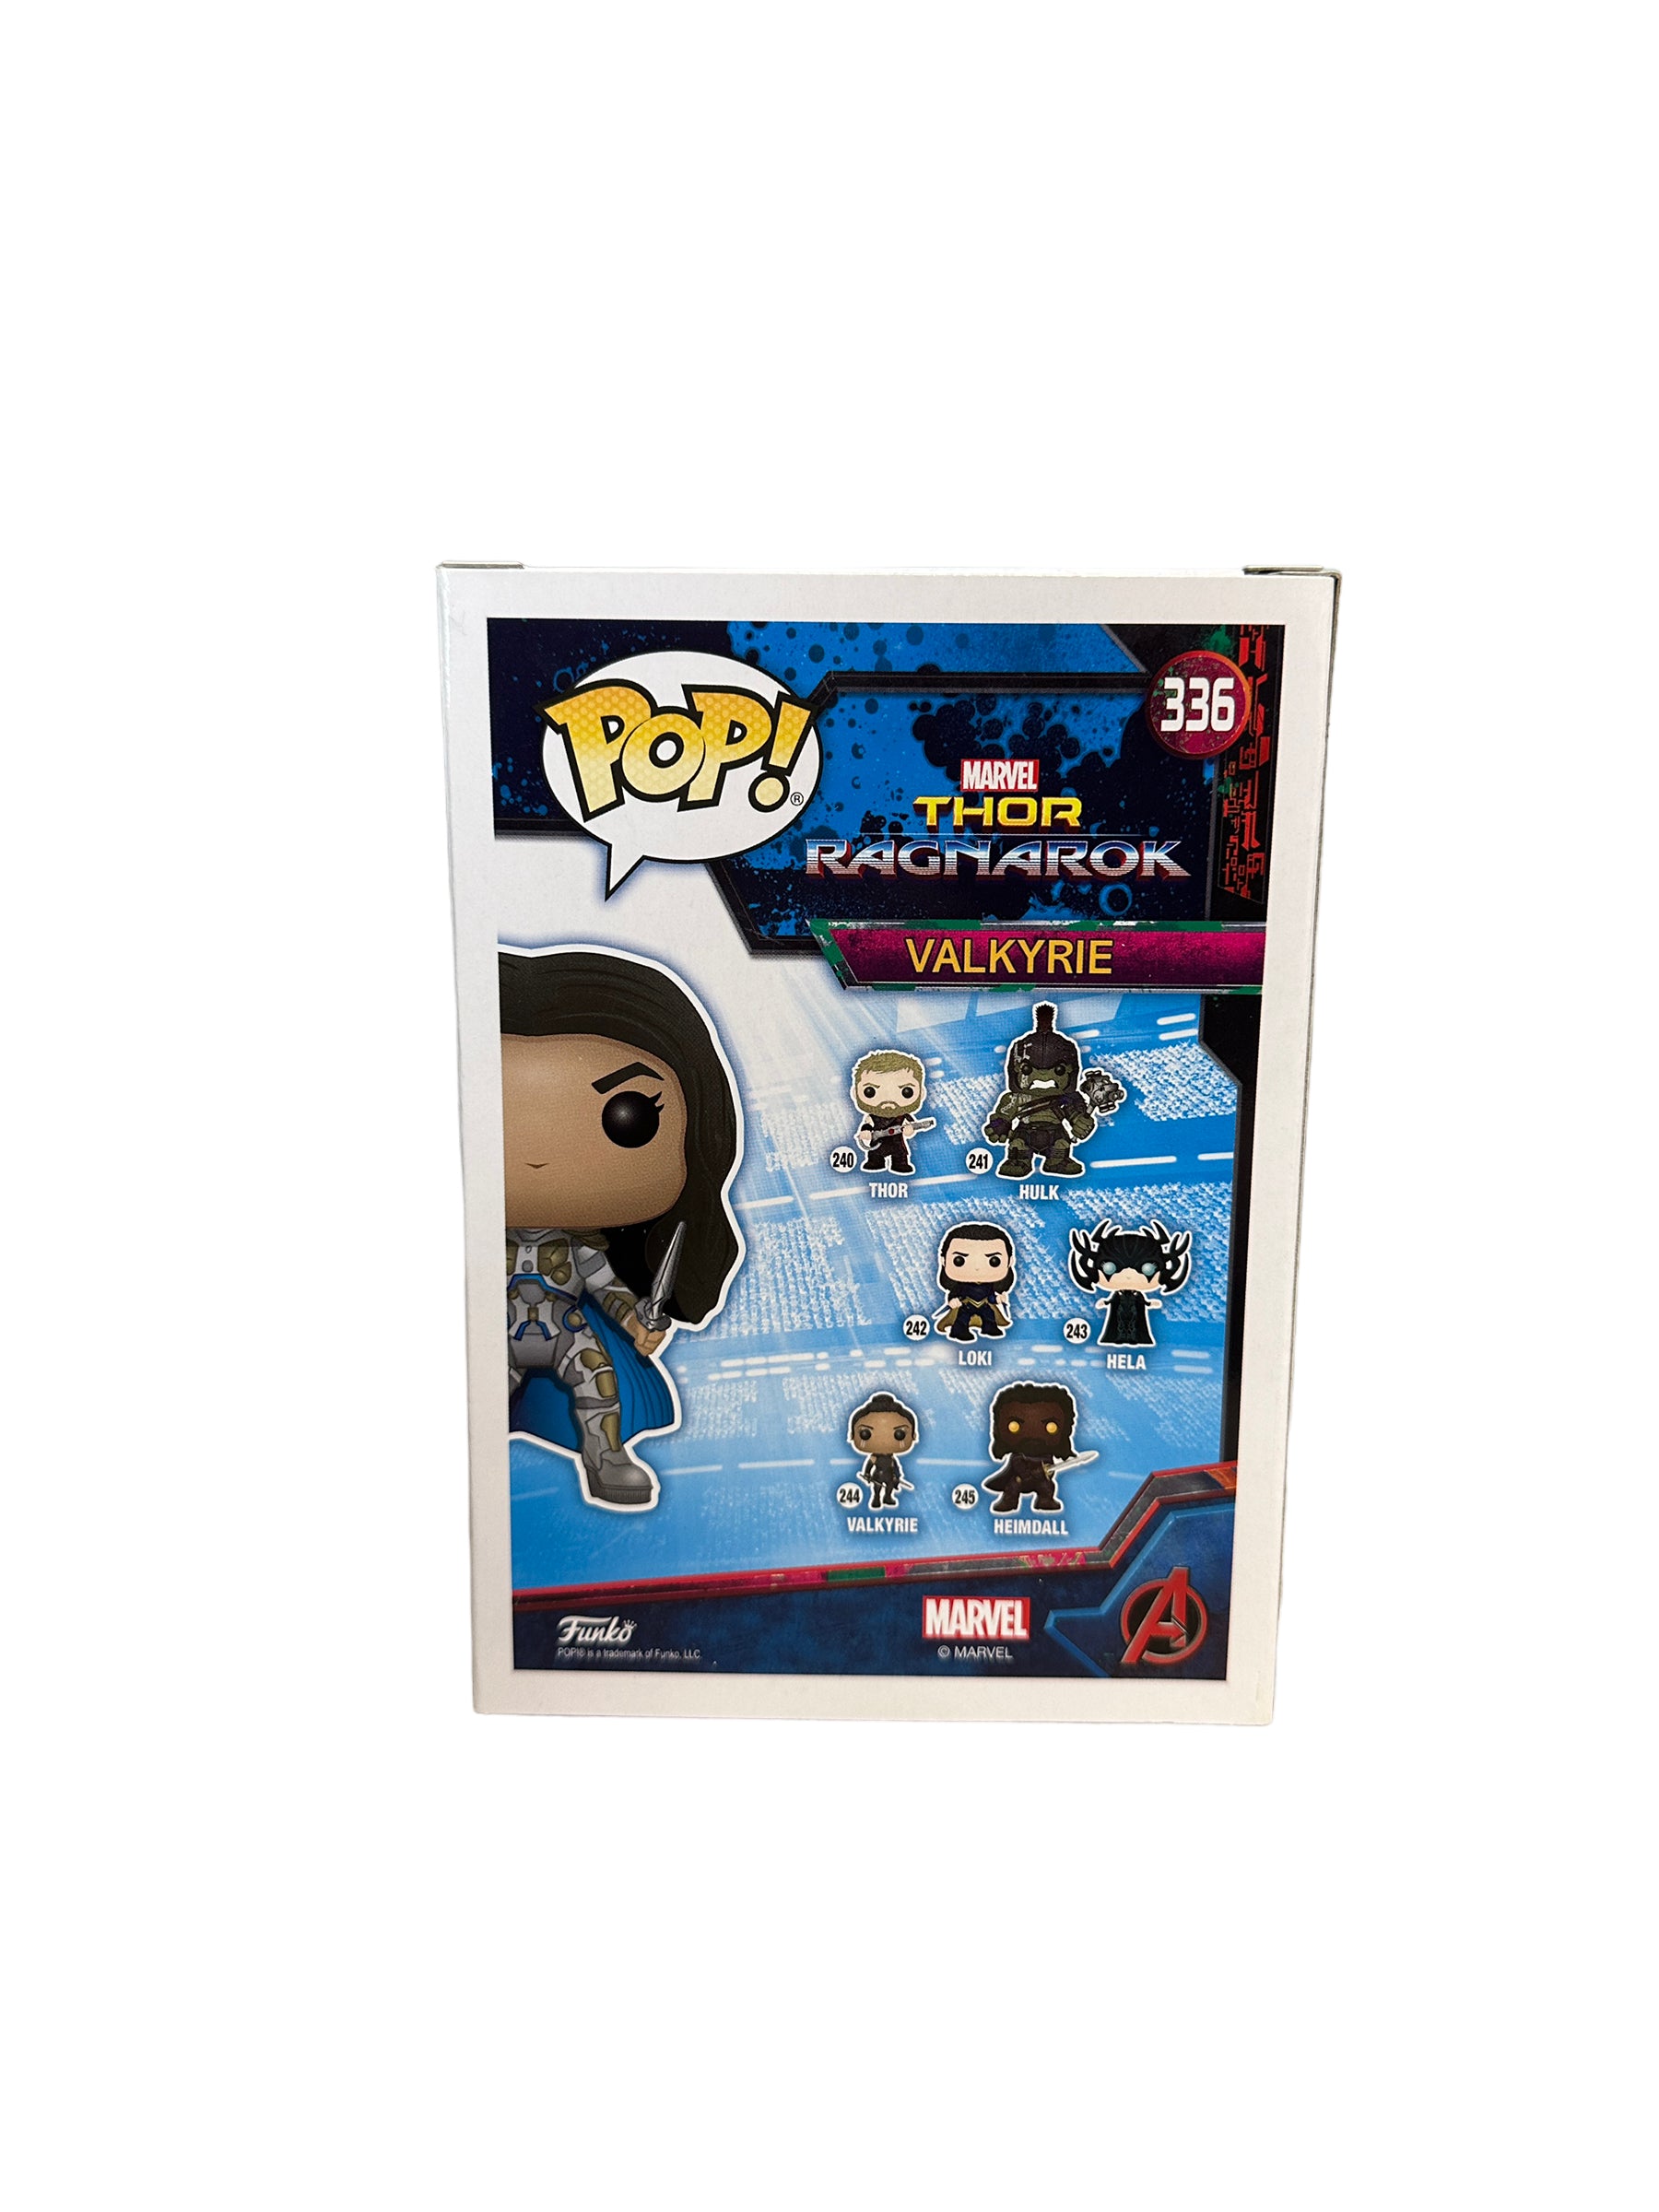 Valkyrie #336 Funko Pop! - Thor Ragnarok - SDCC 2018 Official Convention Exclusive - Condition 8.75/10